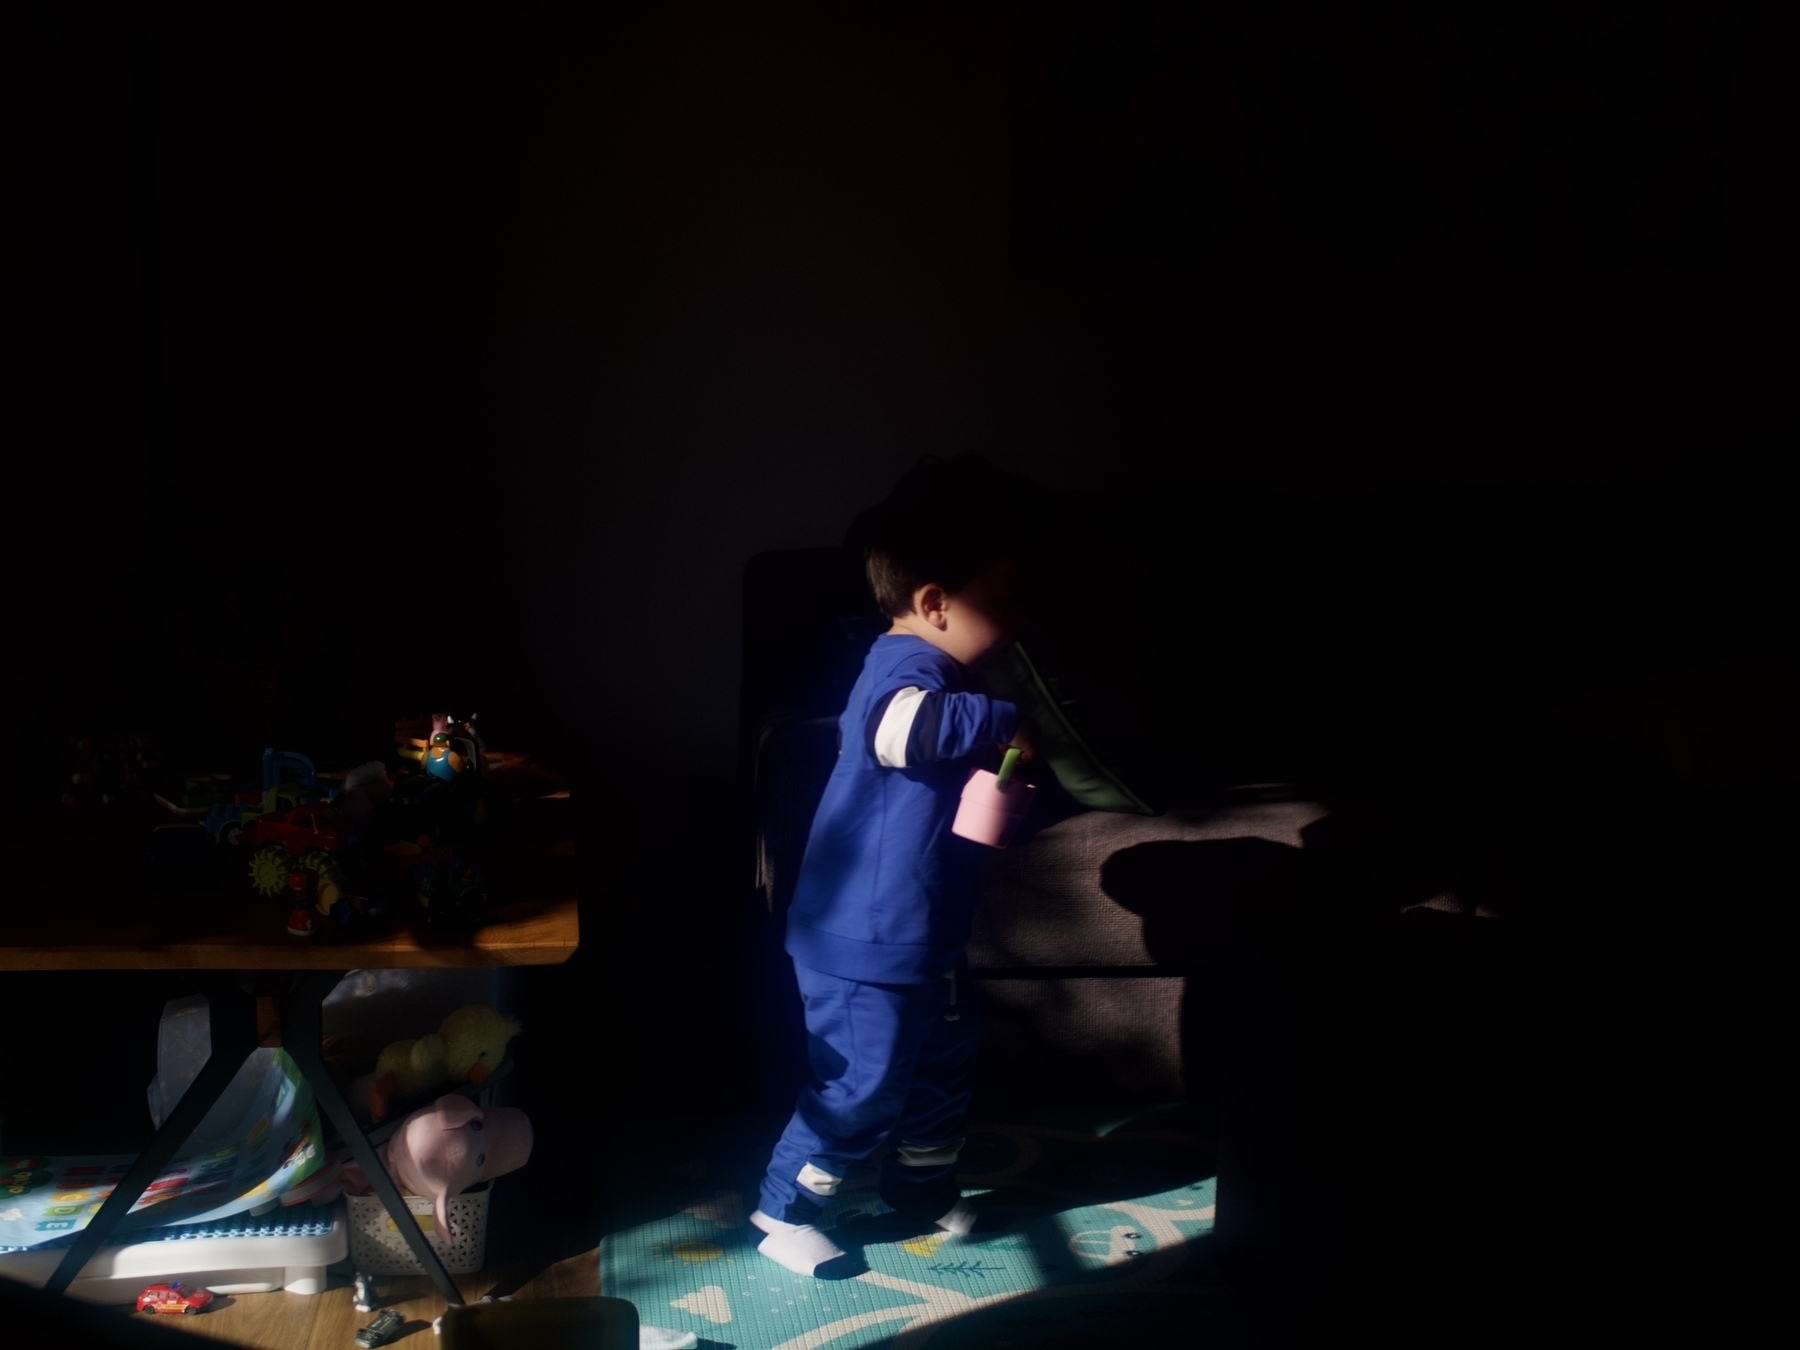 A toddler runs across a lounge room, blanketed in shadow.